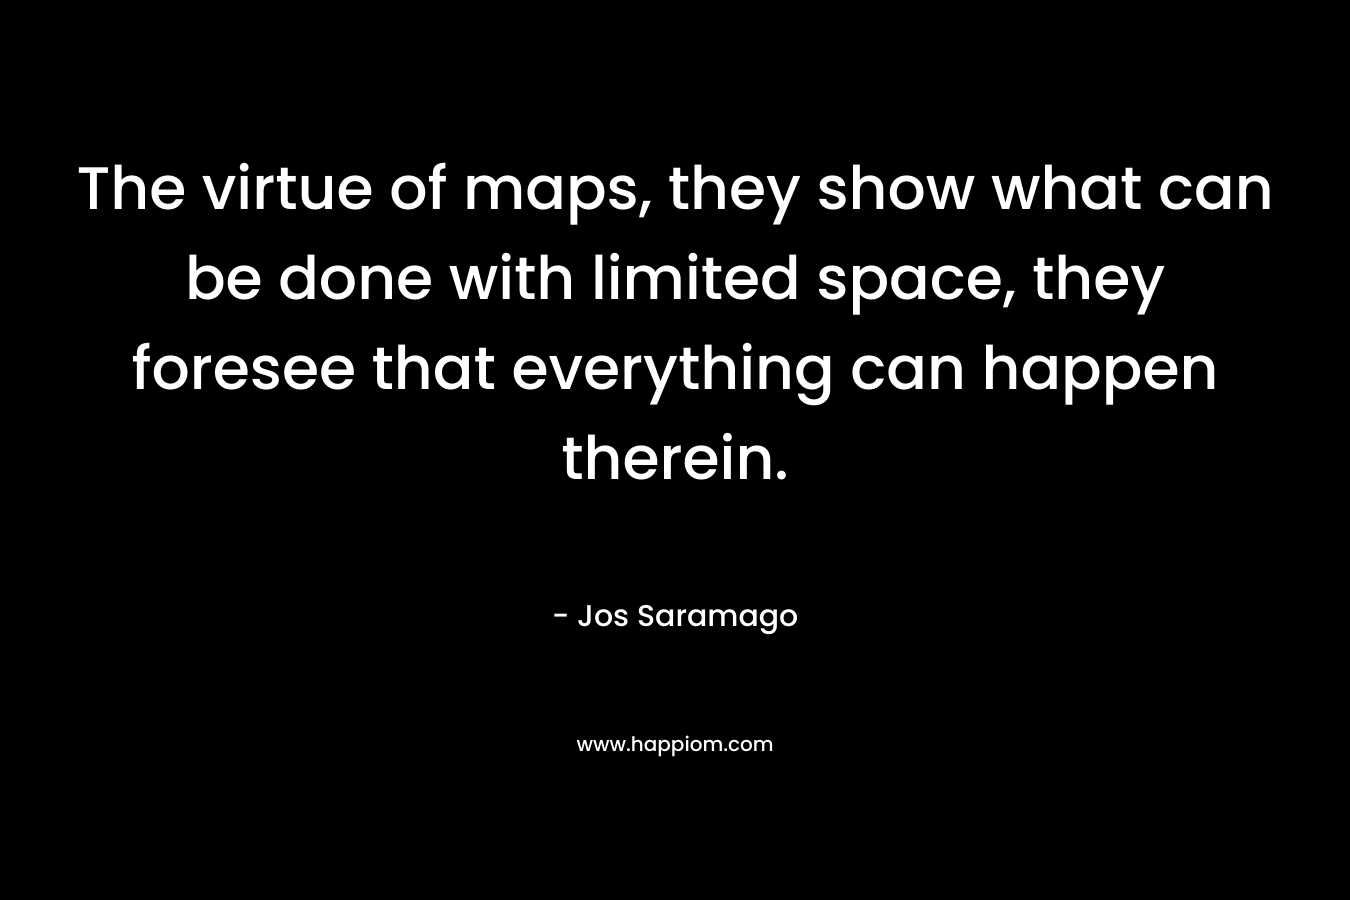 The virtue of maps, they show what can be done with limited space, they foresee that everything can happen therein. – Jos Saramago